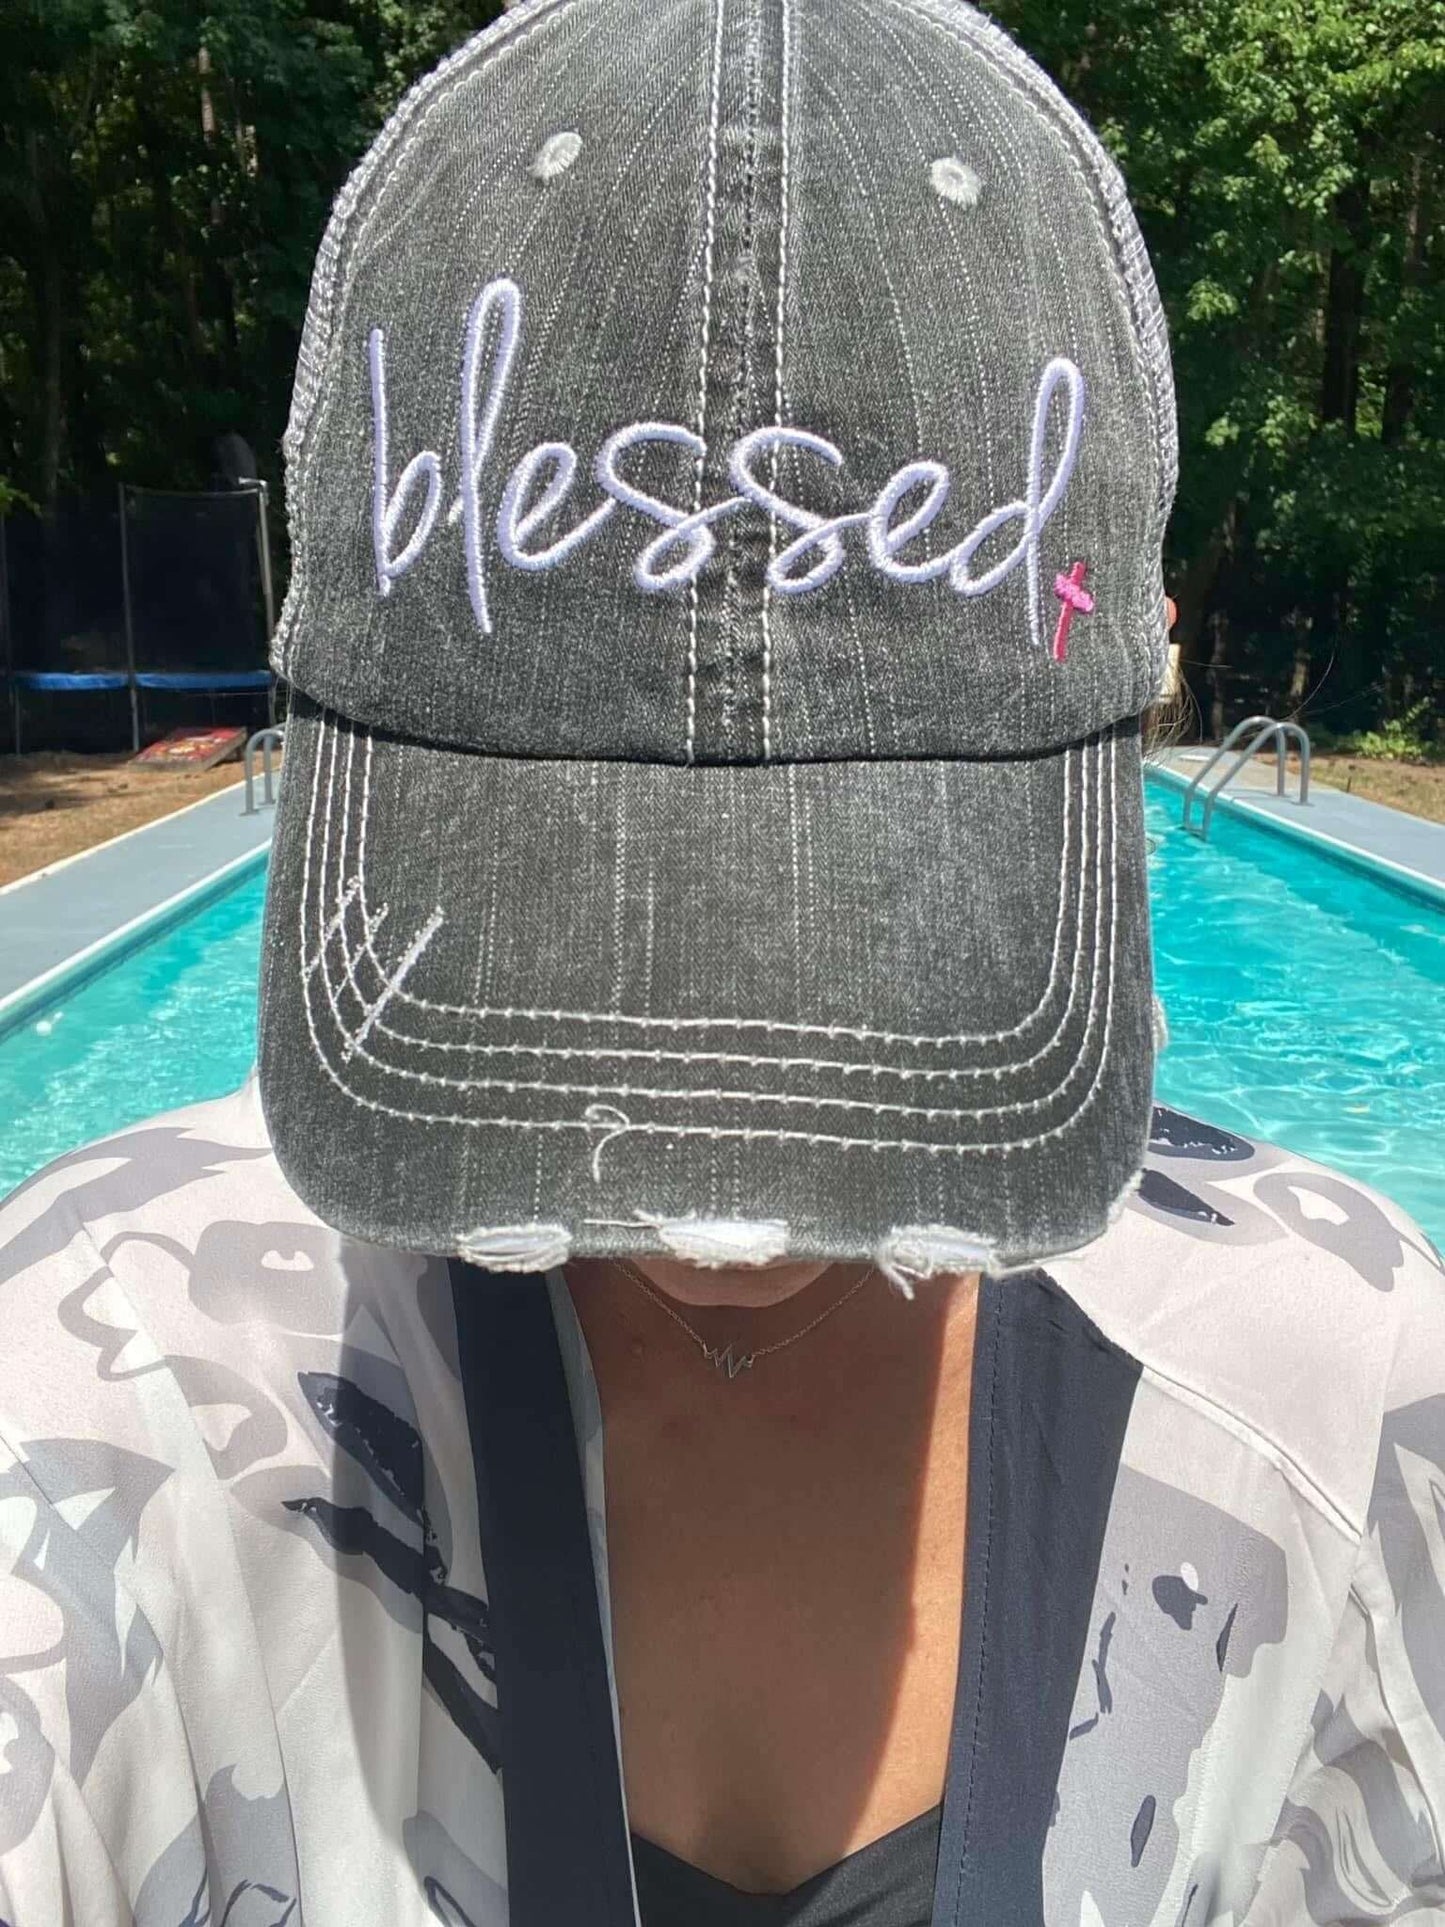 Hats accessories, blessed hat, hats